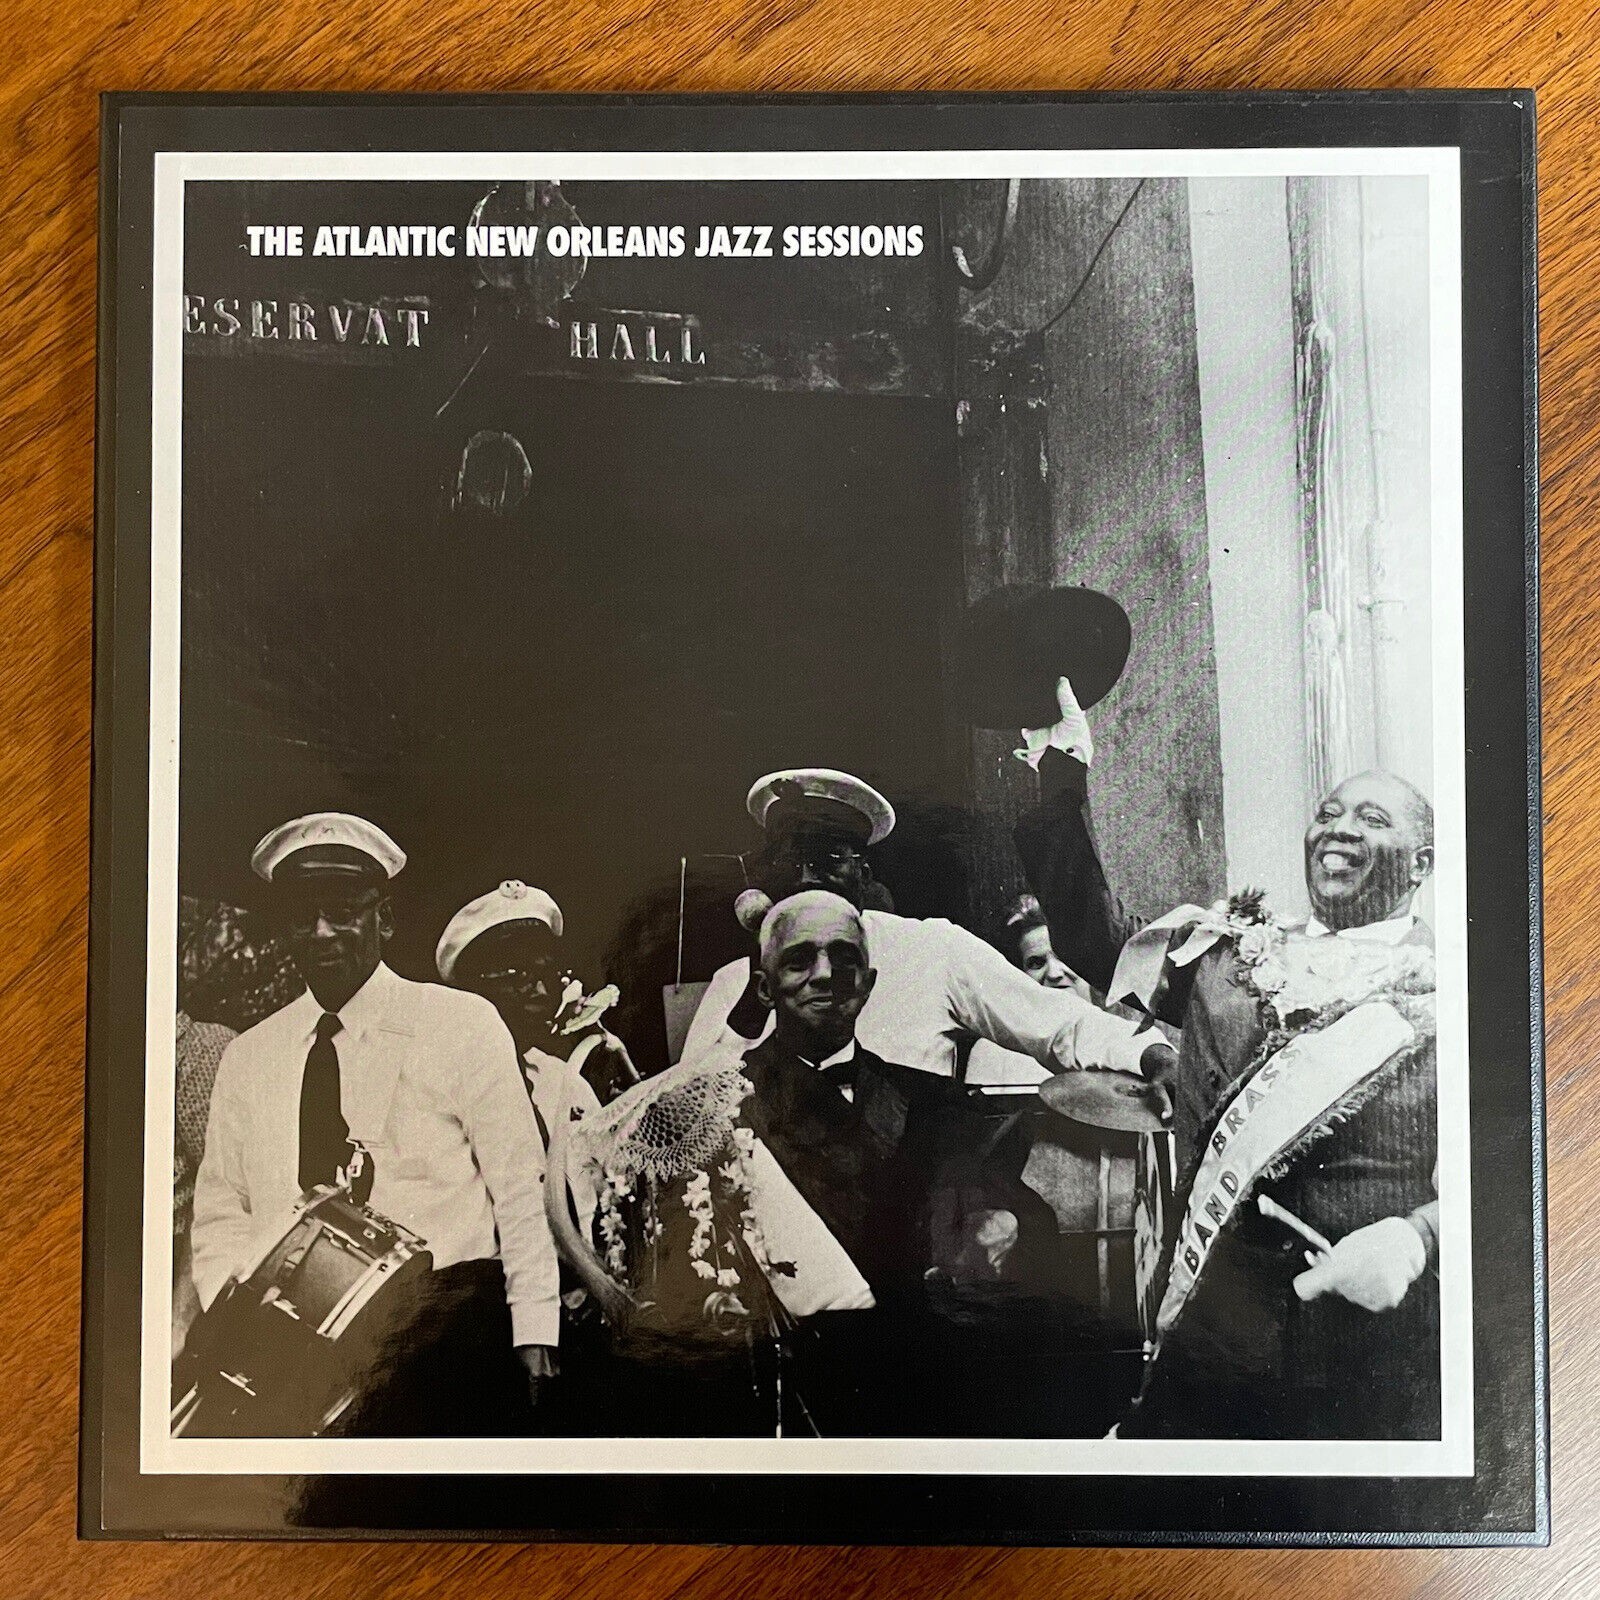 Mosaic Records: The Atlantic New Orleans Jazz Sessions - 4 CD Set